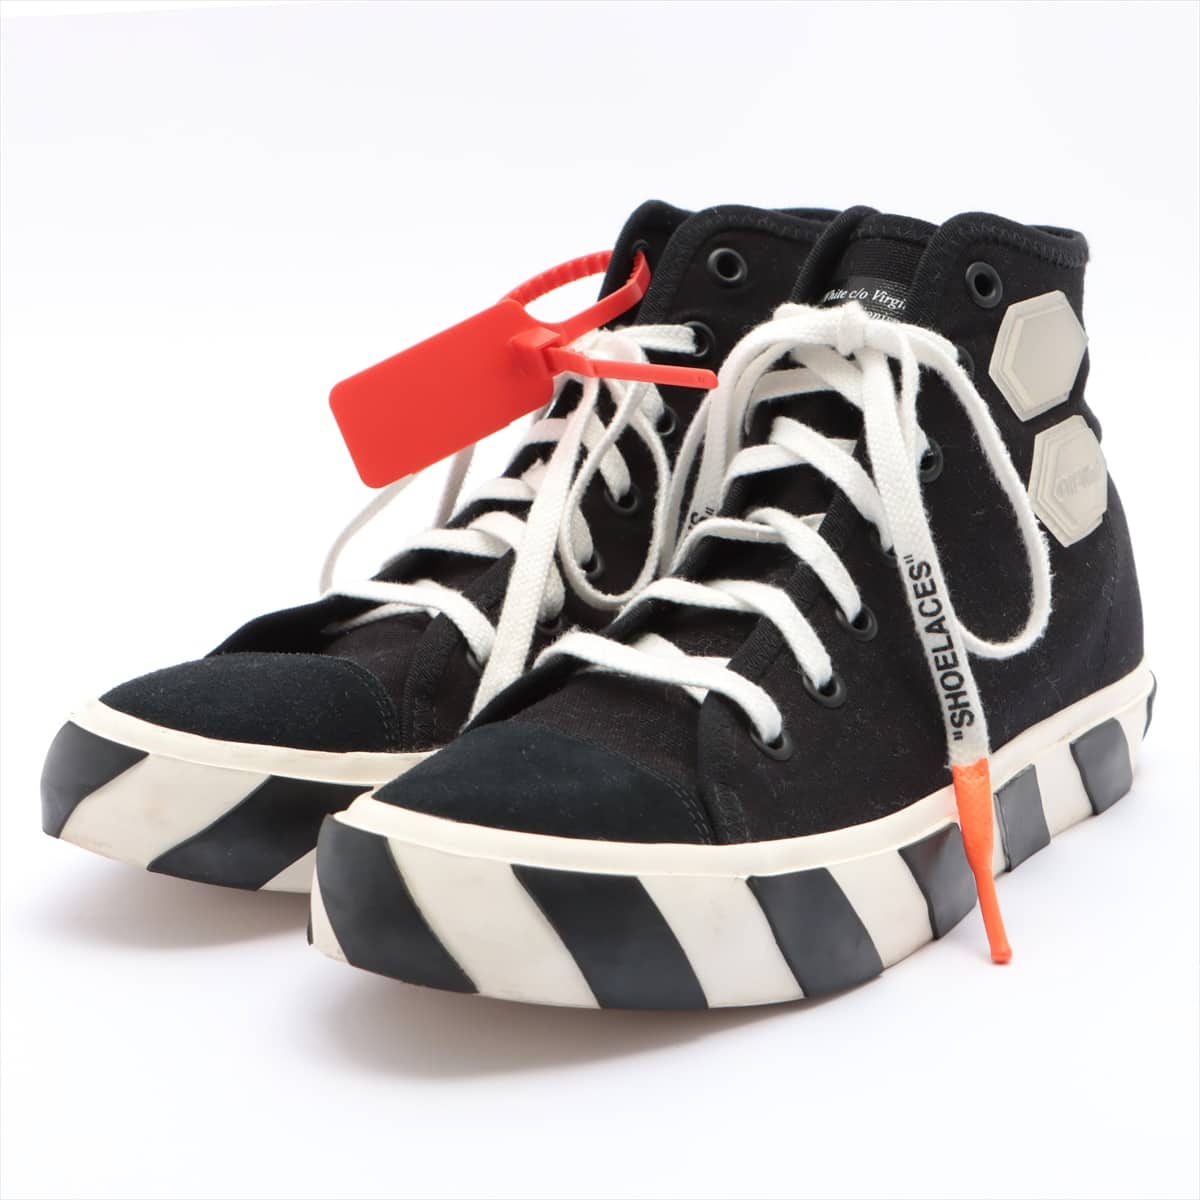 Off-White canvas High-top Sneakers 42 Men's Black